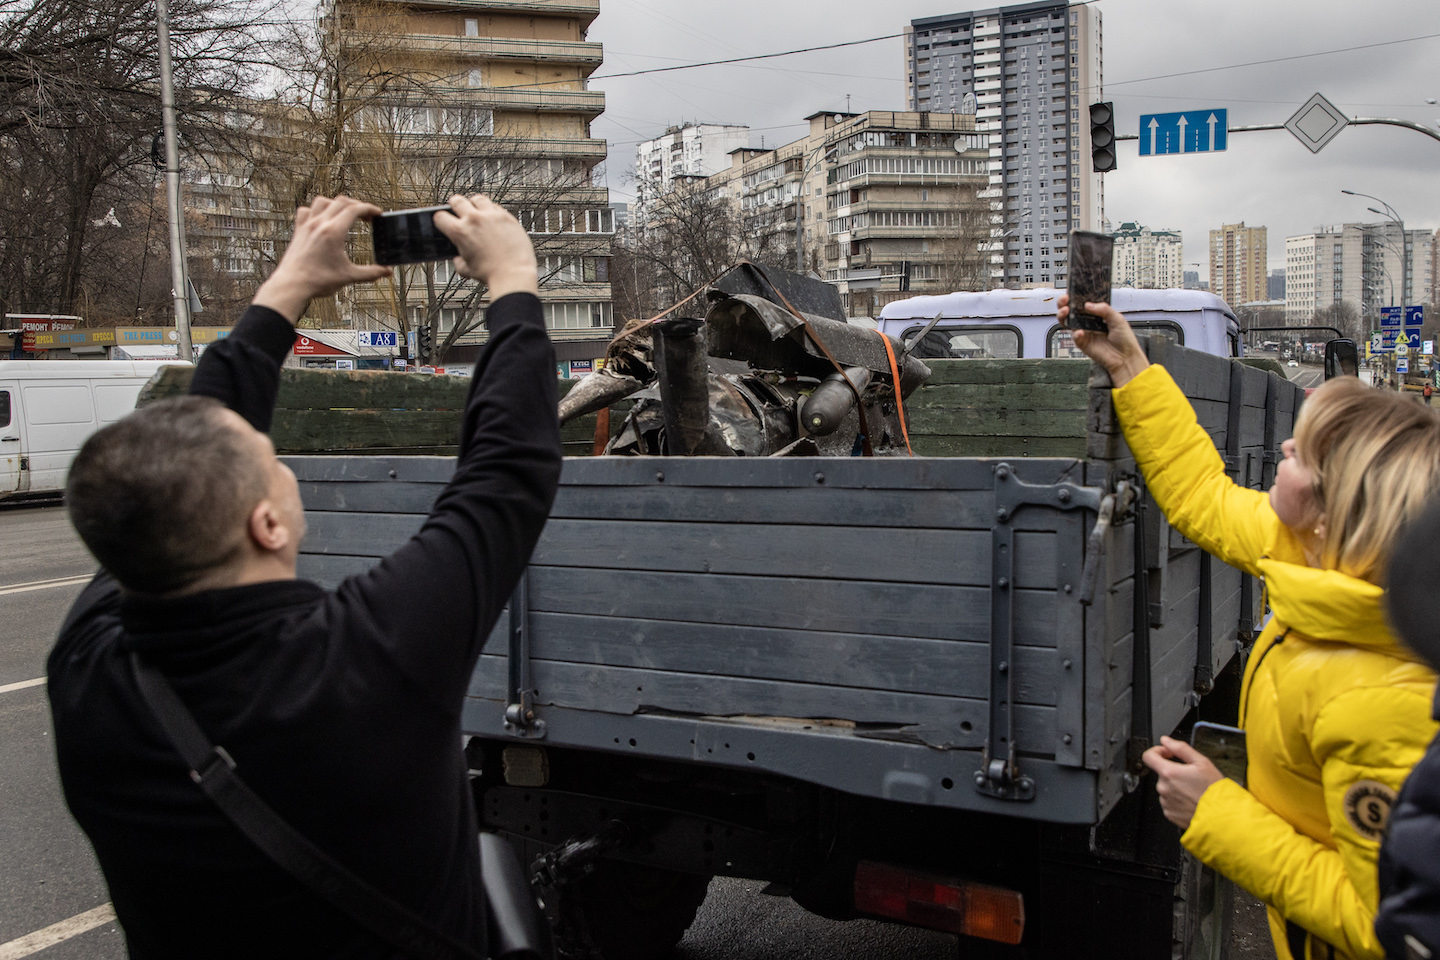 People take photos of a rocket as it is removed on February 24, 2022 in Kyiv, Ukraine.